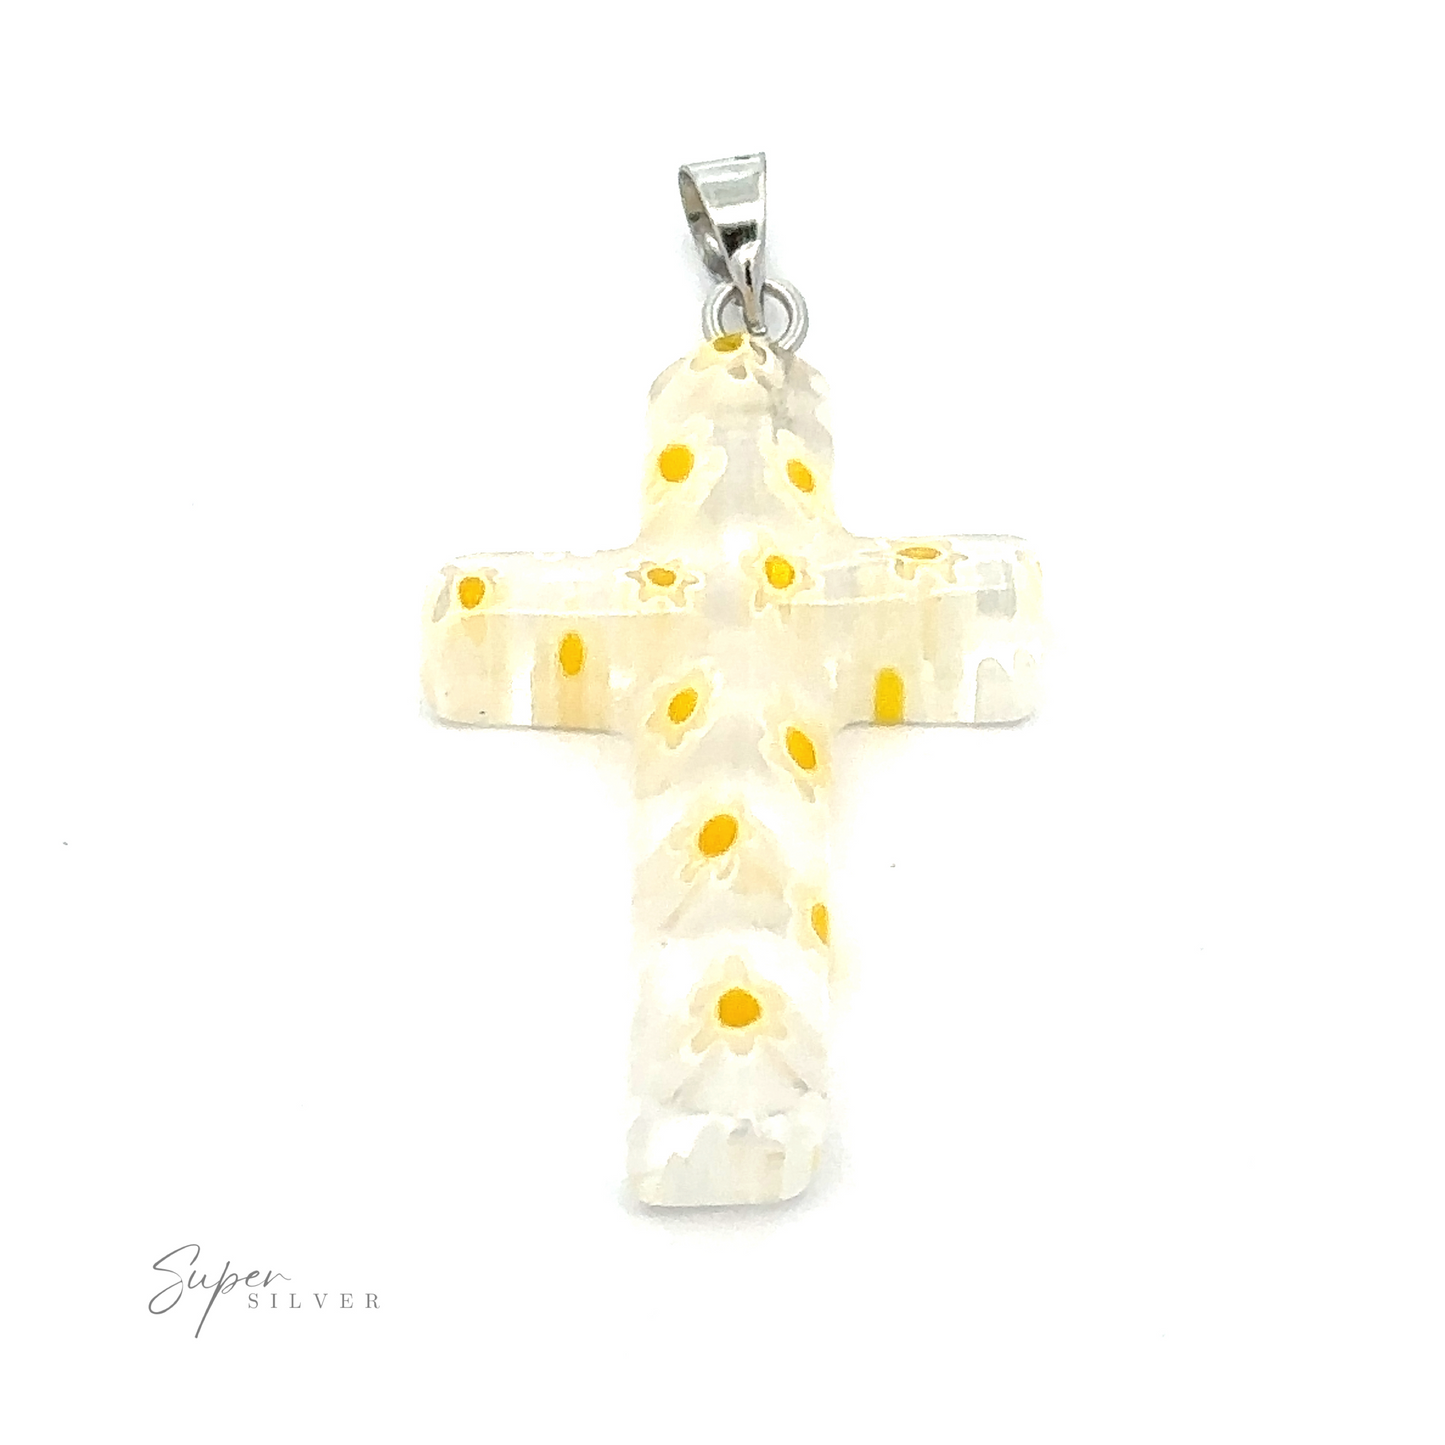 
                  
                    A Cross Pendant with Flower Pattern crafted from translucent resin with yellow floral patterns and a small metal loop for attaching to a chain. The background is plain white.
                  
                